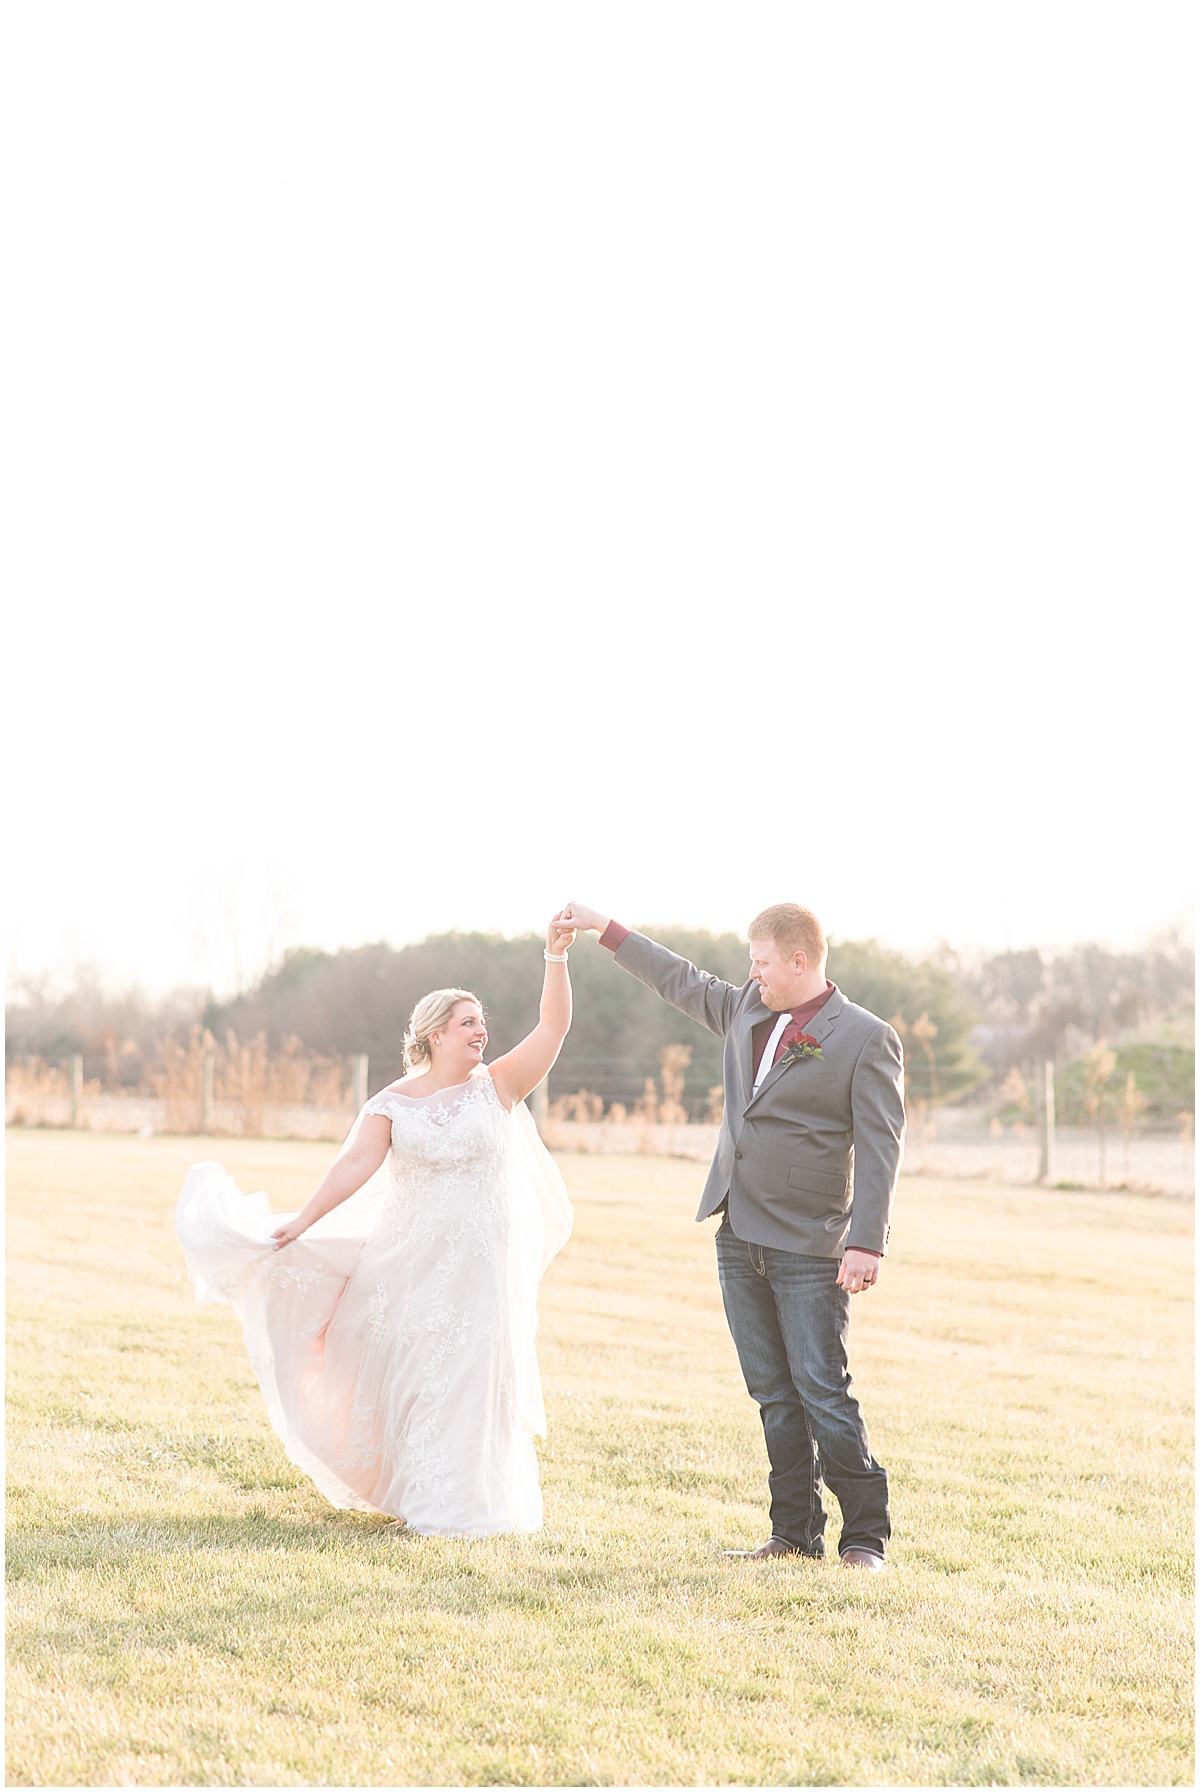 Bride and groom sunset photos at Jasper County Fairgrounds in Rensselaer, Indiana